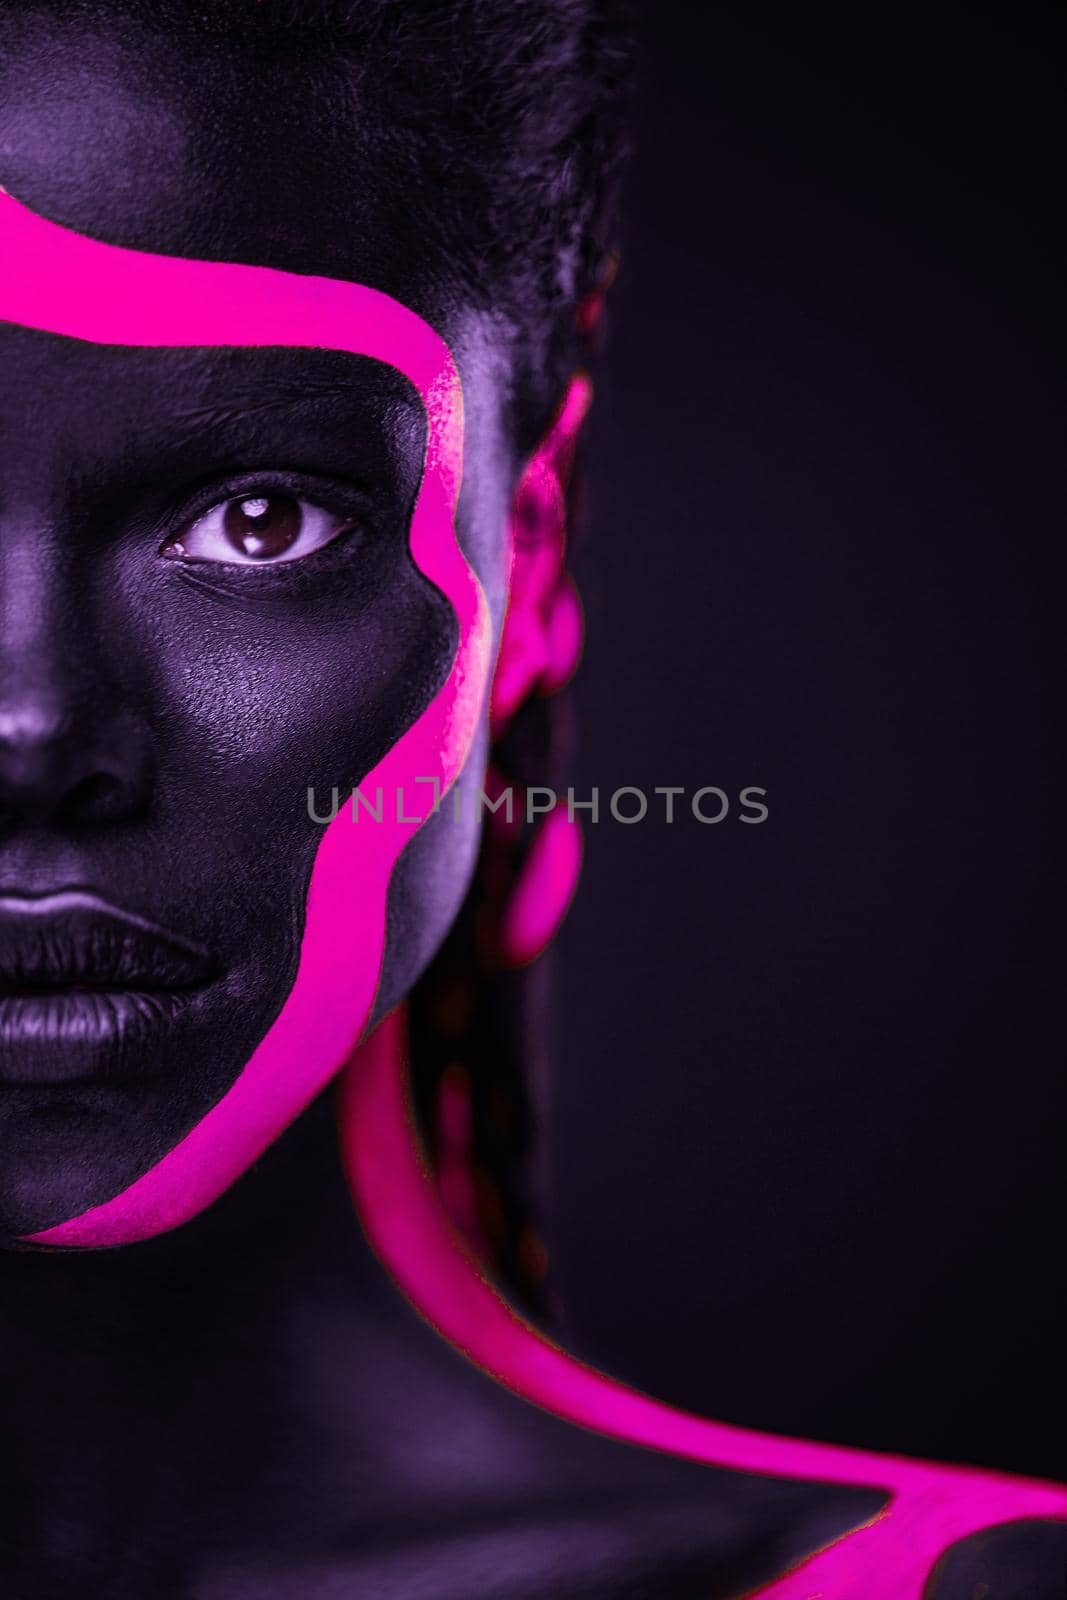 Neon colors. Pink and black body paint. Woman with face art. Young girl with colorful bodypaint. An amazing afro american model with makeup